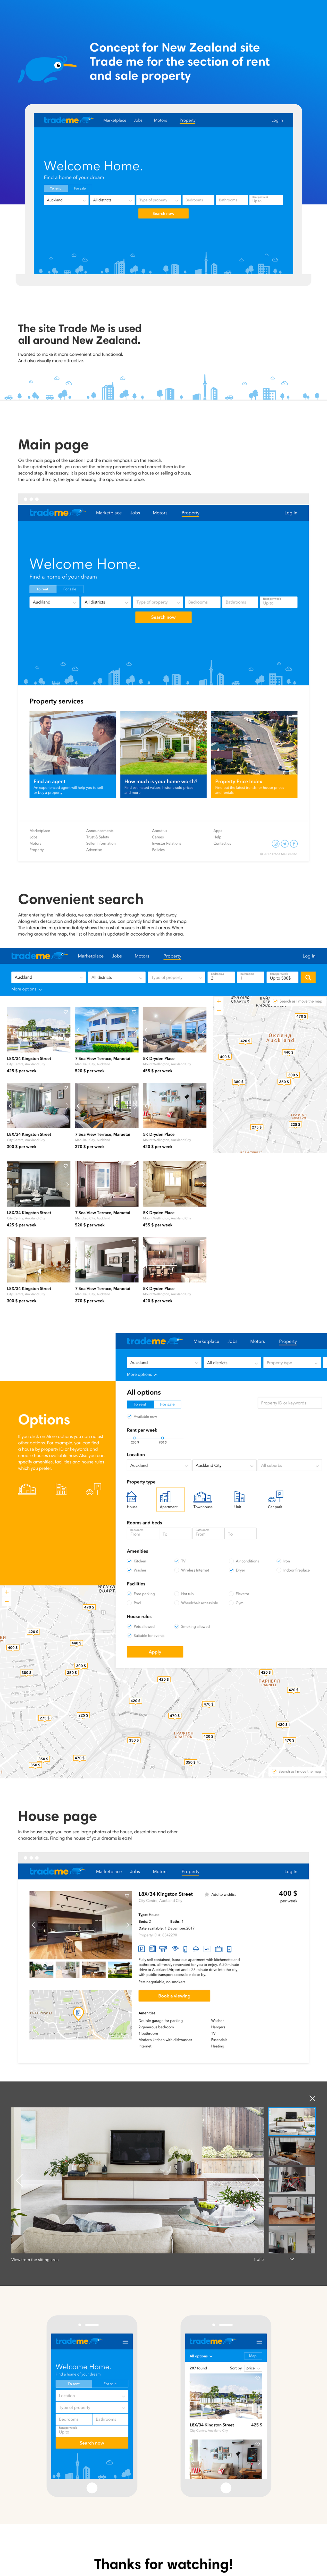 trademe Rent sale UI ux design property New Zealand house home